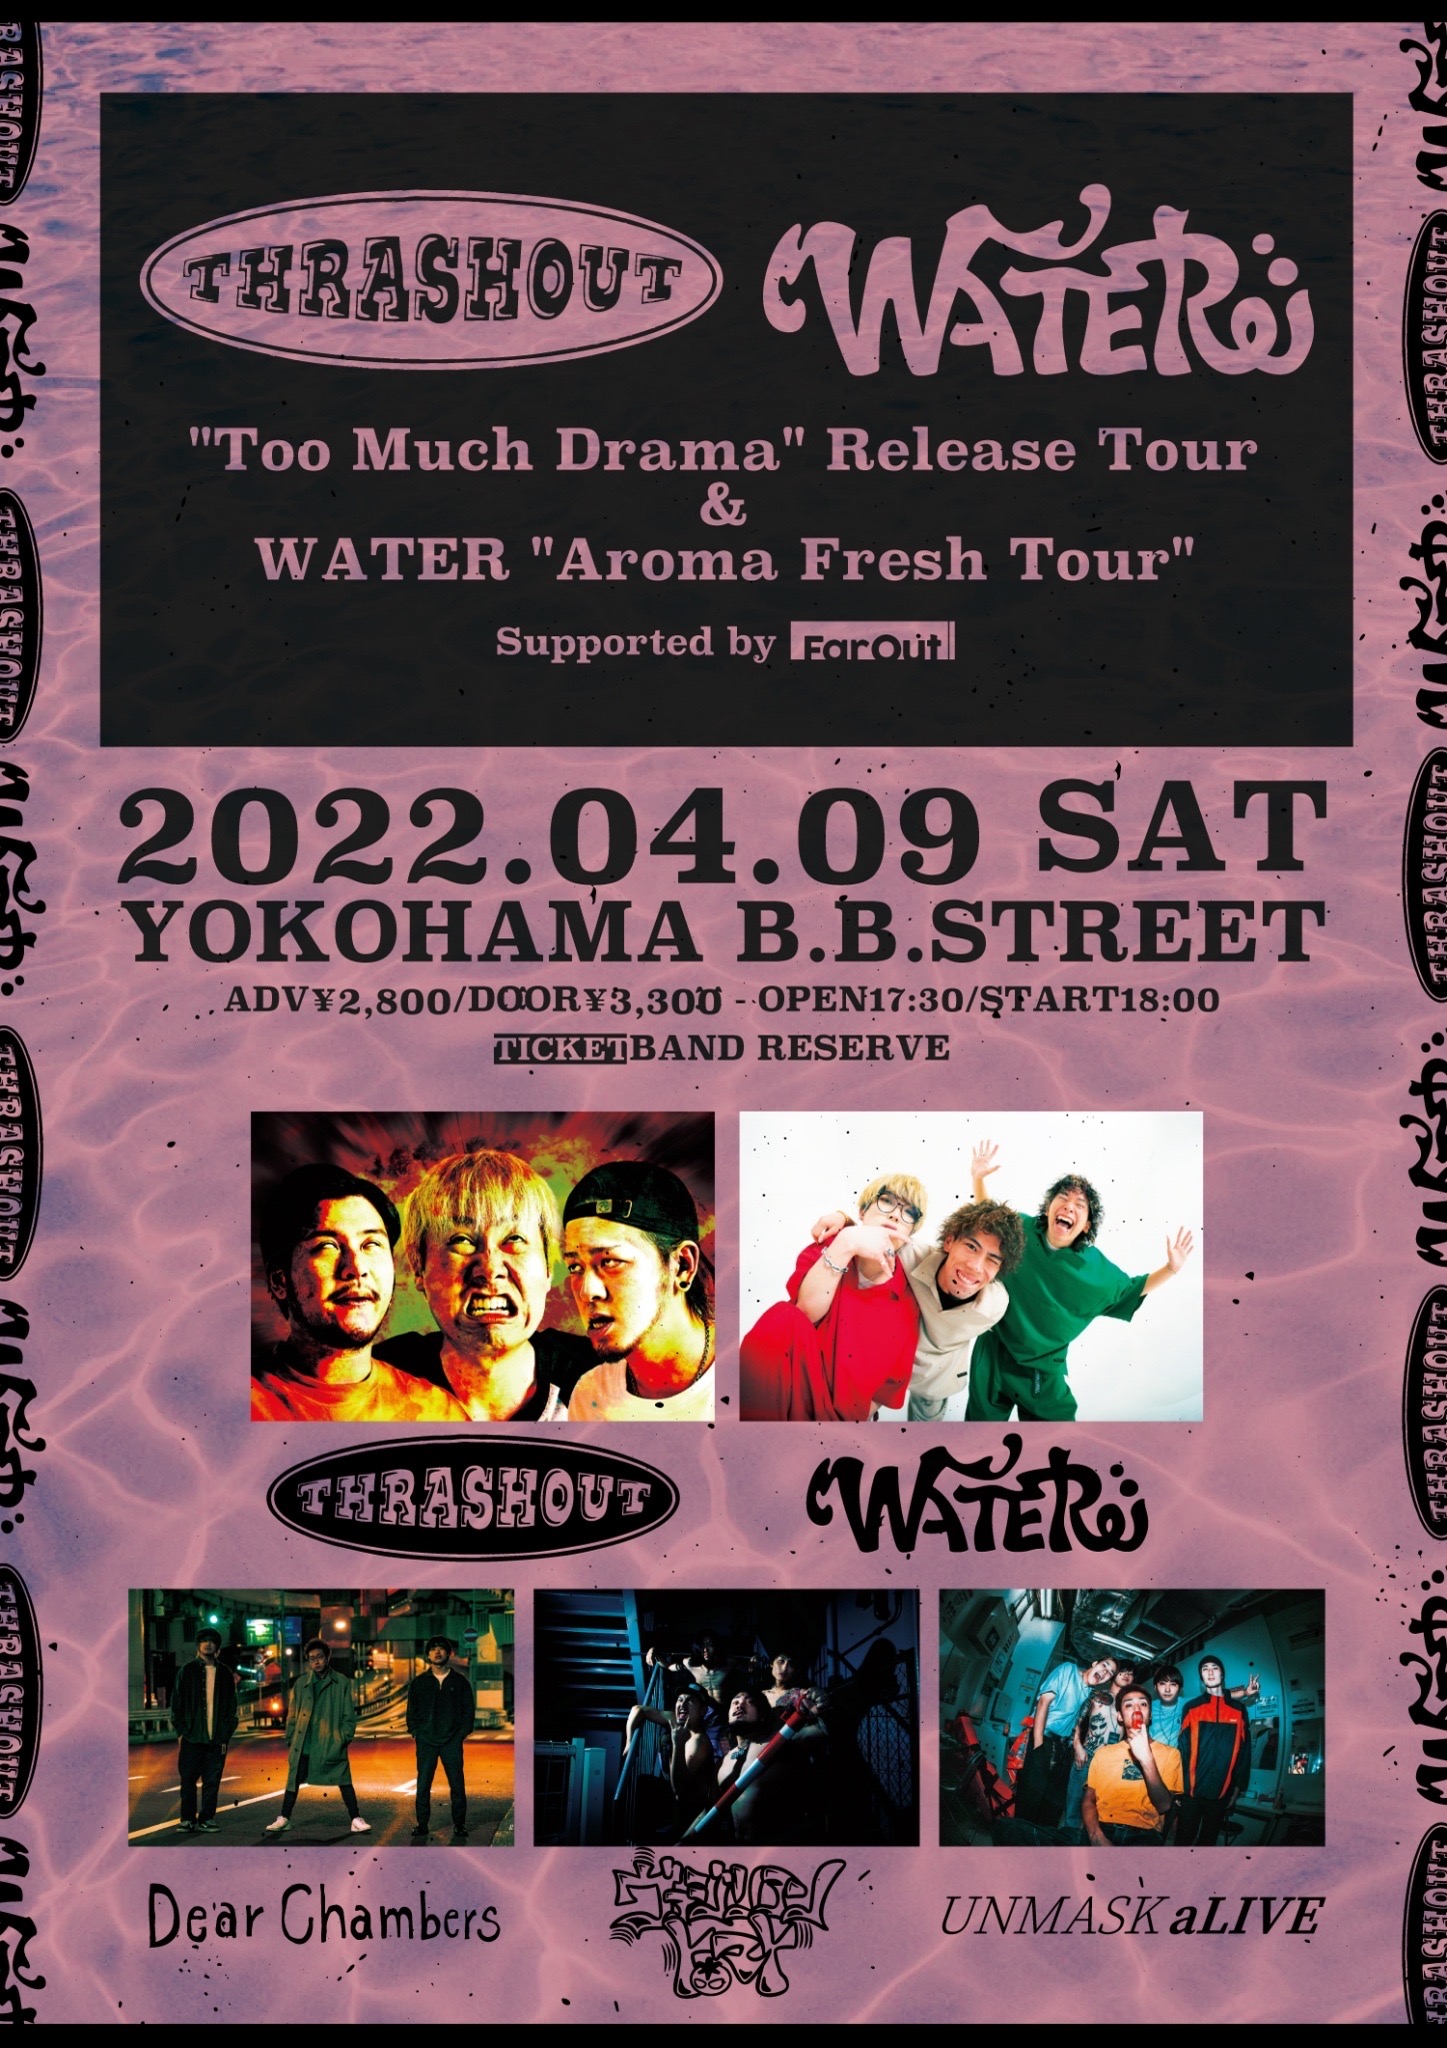 THRASHOUT “Too Much Drama” Release Tour & WATER “Aroma Freshツアー”